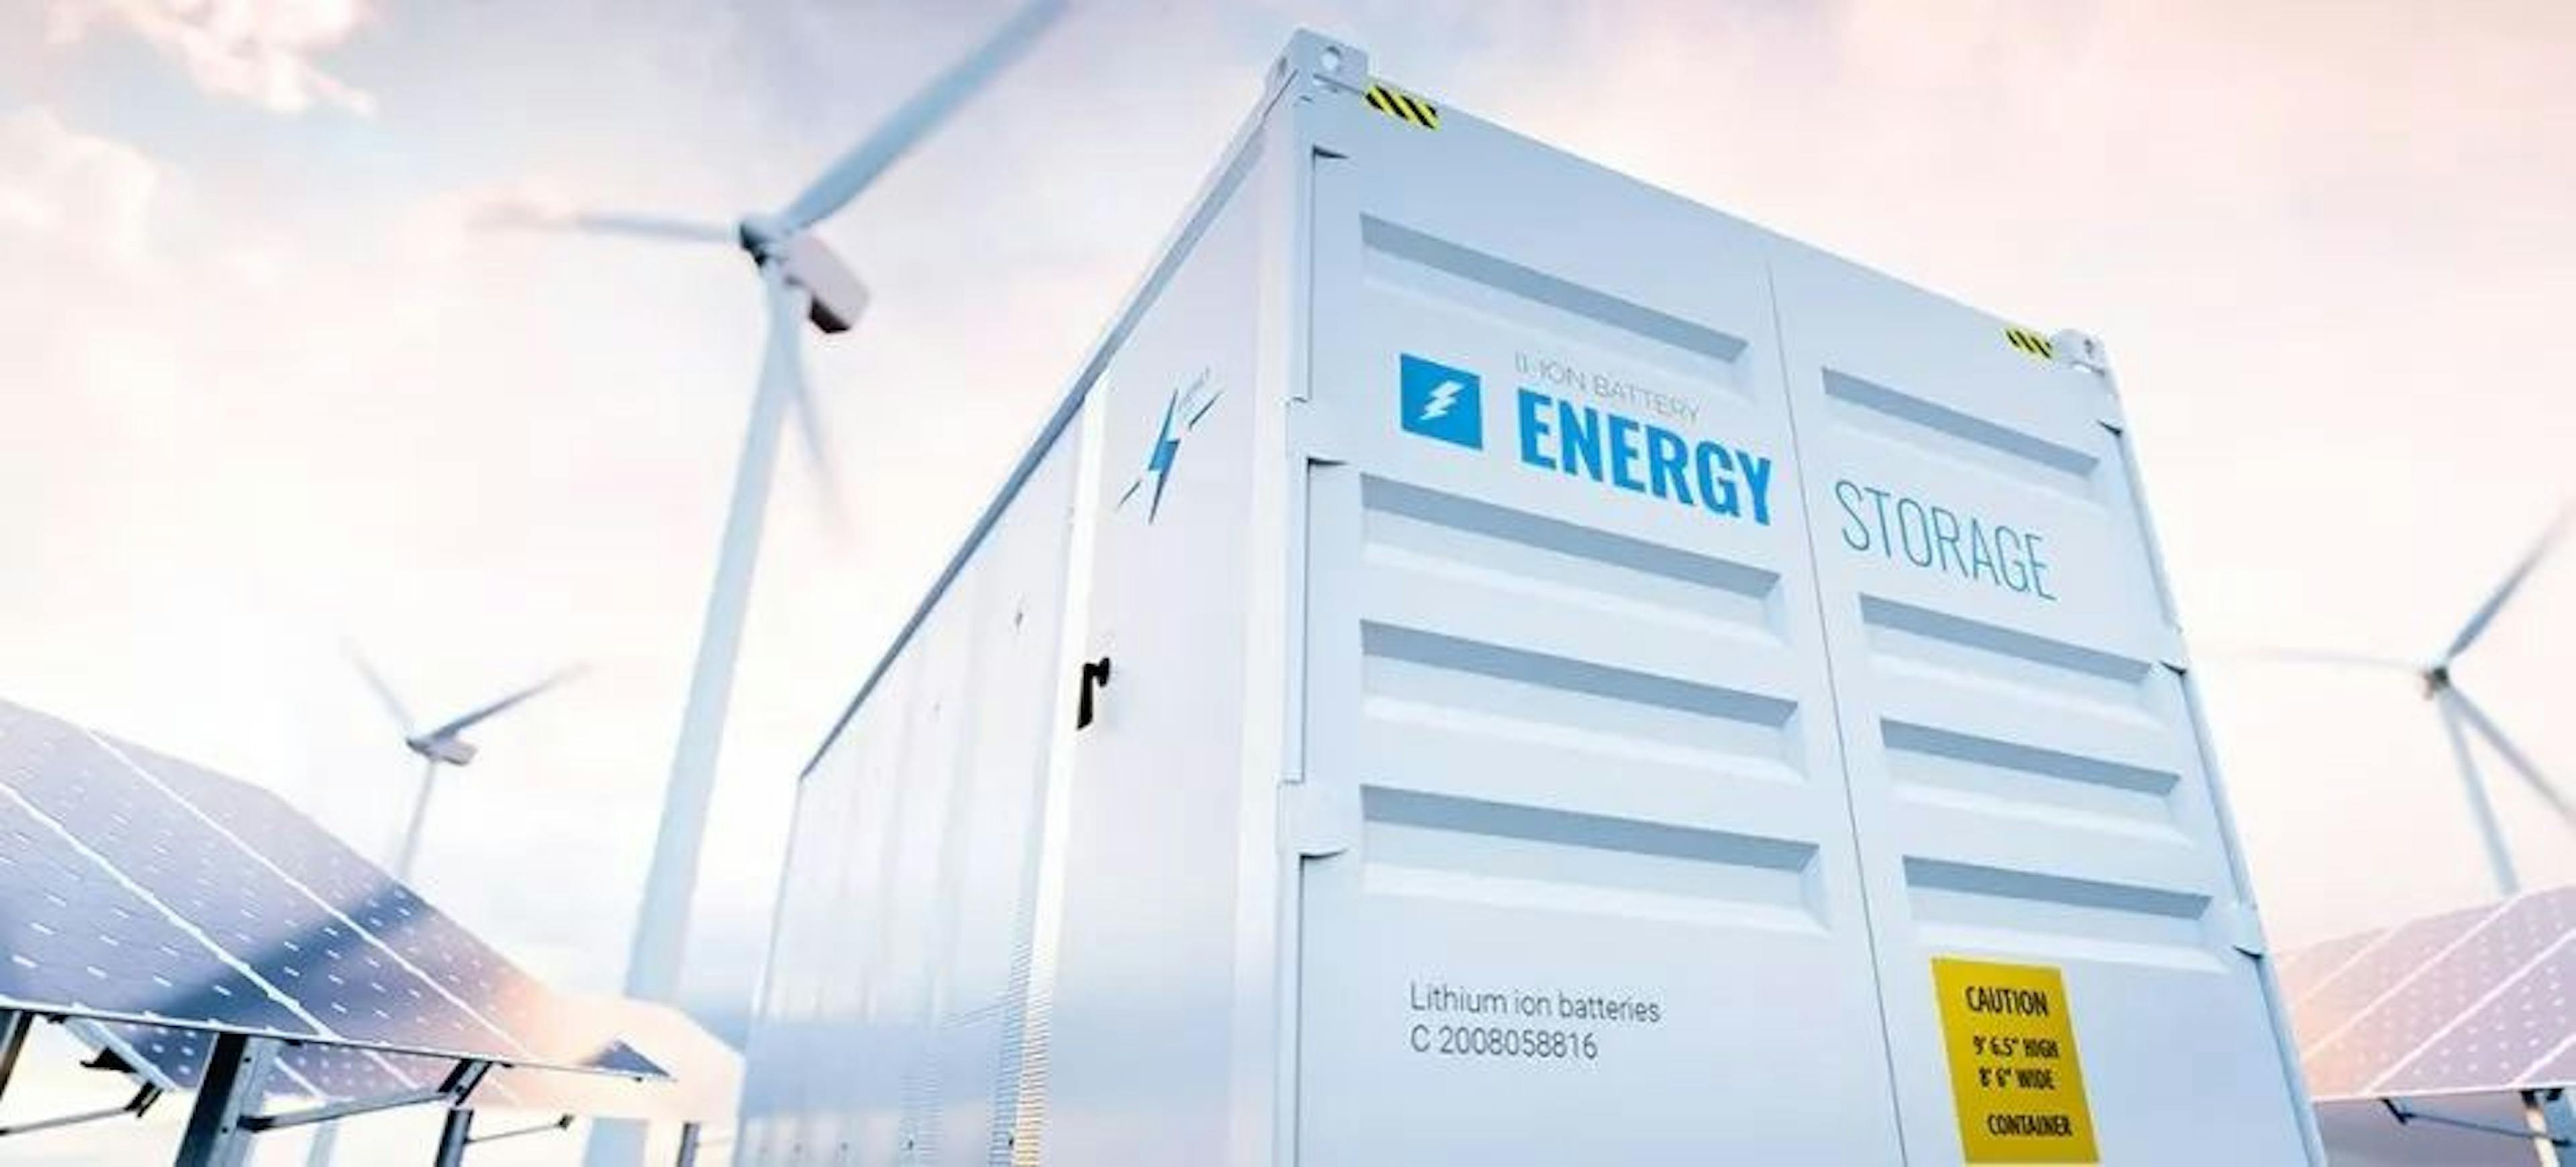 /what-is-a-bess-battery-energy-storage-system-and-how-does-it-work feature image